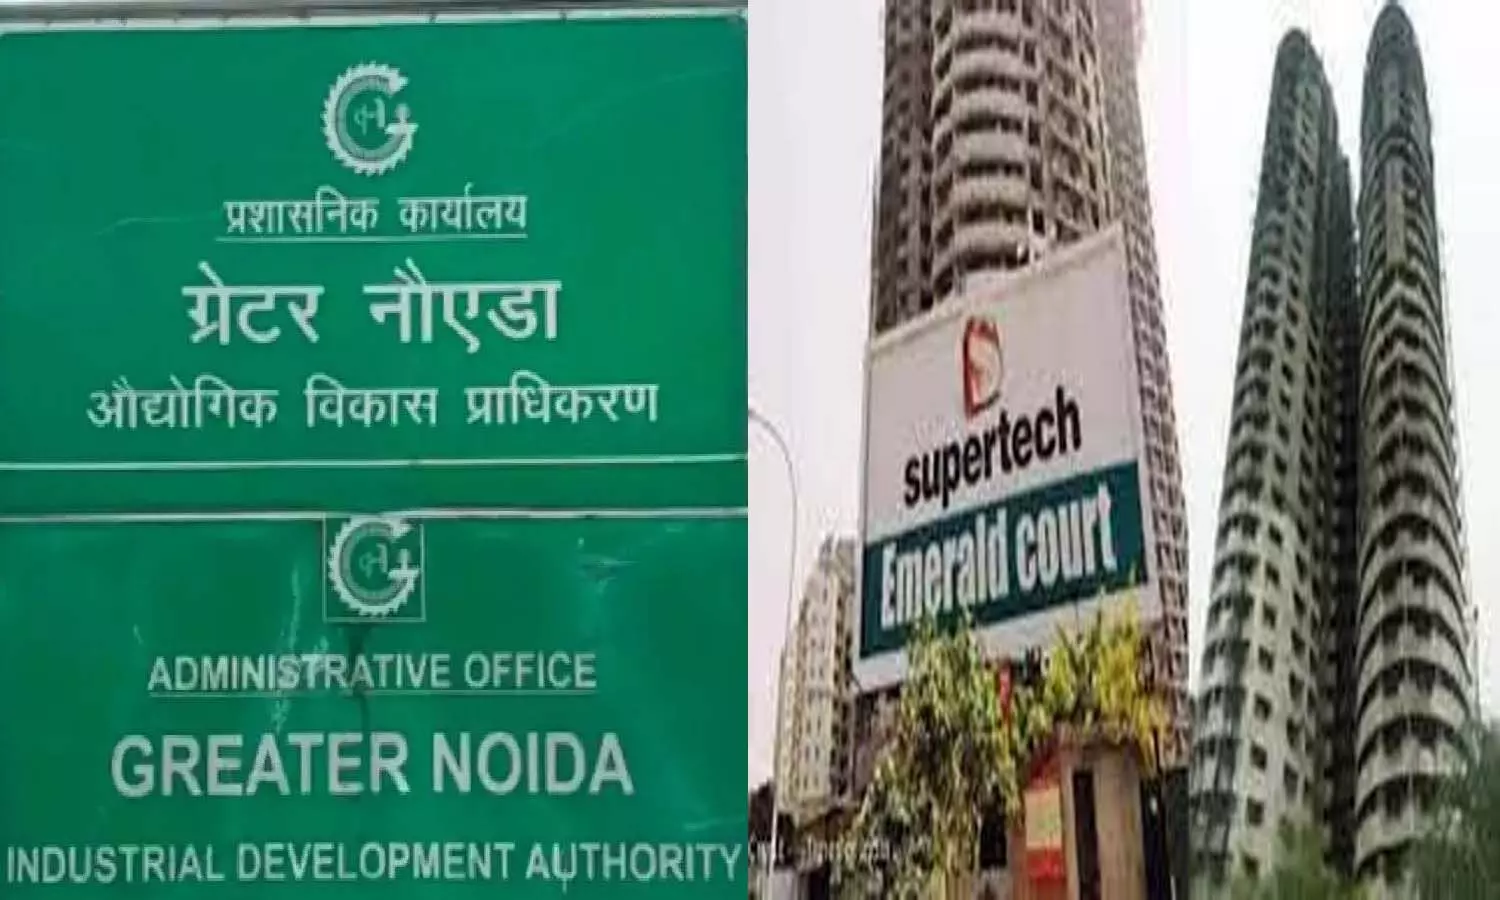 The investigation of Noidas Supertech case is almost over now. A team from Lucknow is collecting all the documents and preparing the final noting.